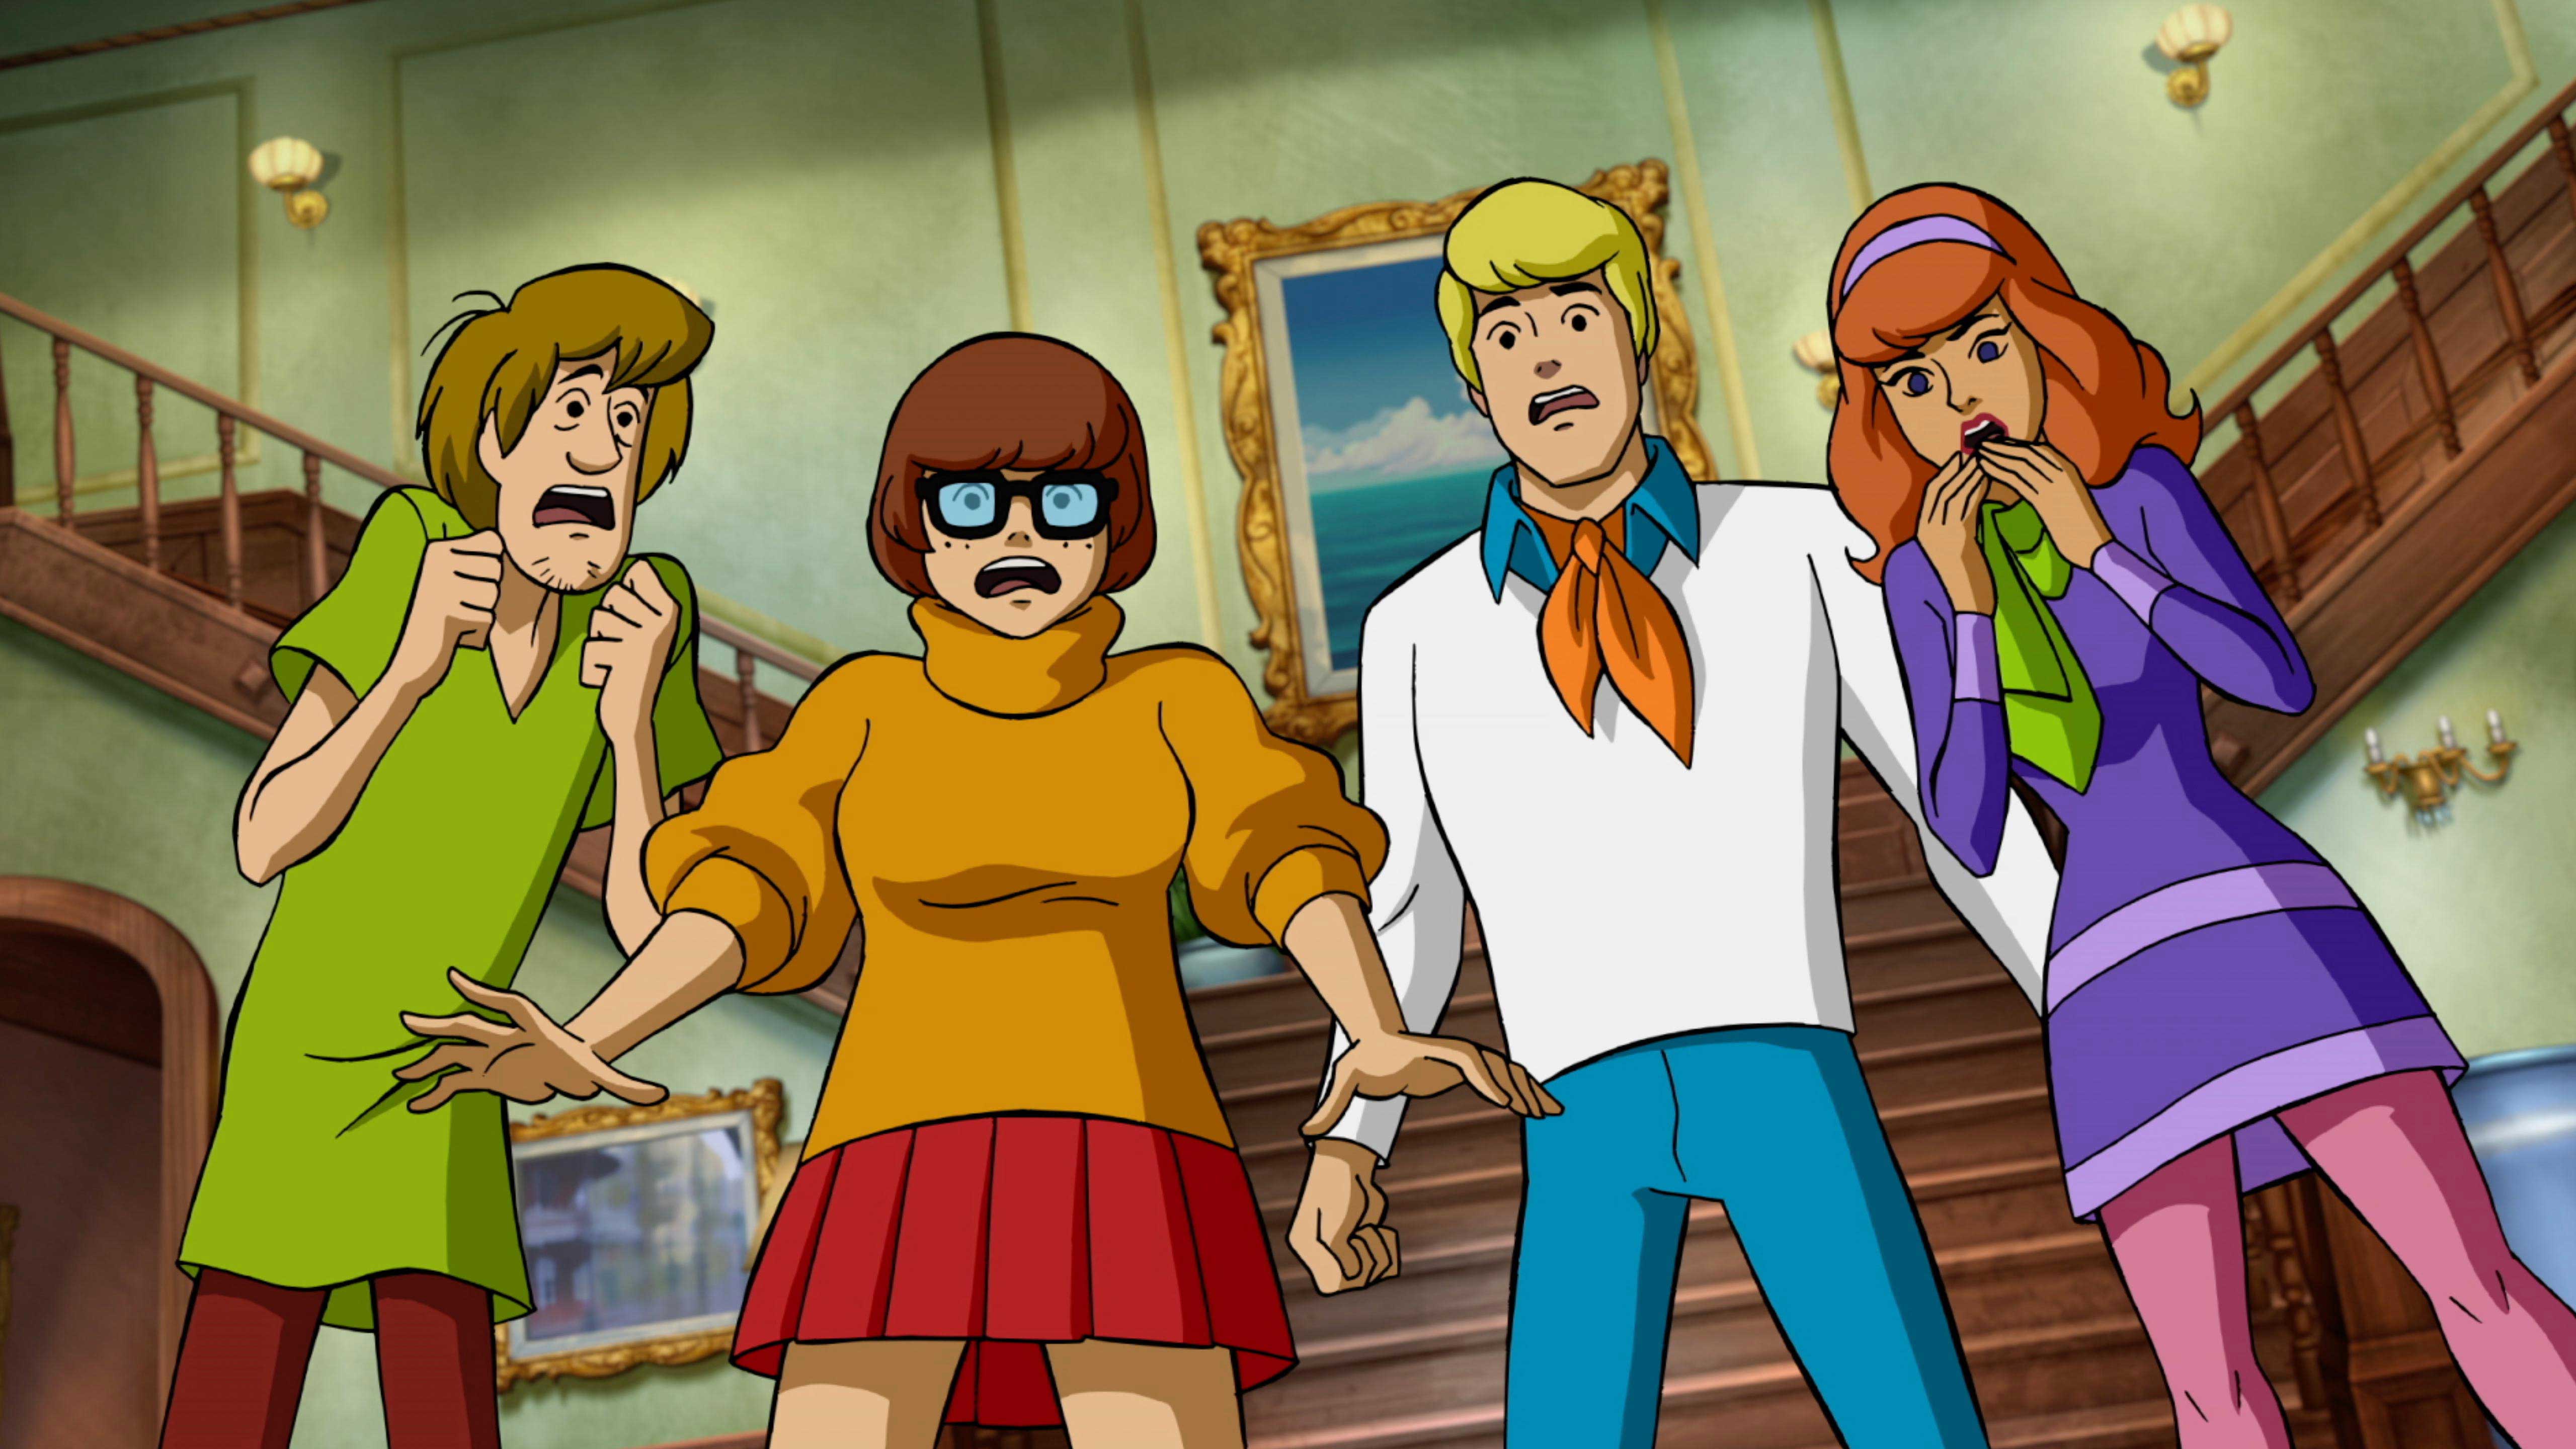 ScoobyDoo returns to Zombie Island in new animated feature film